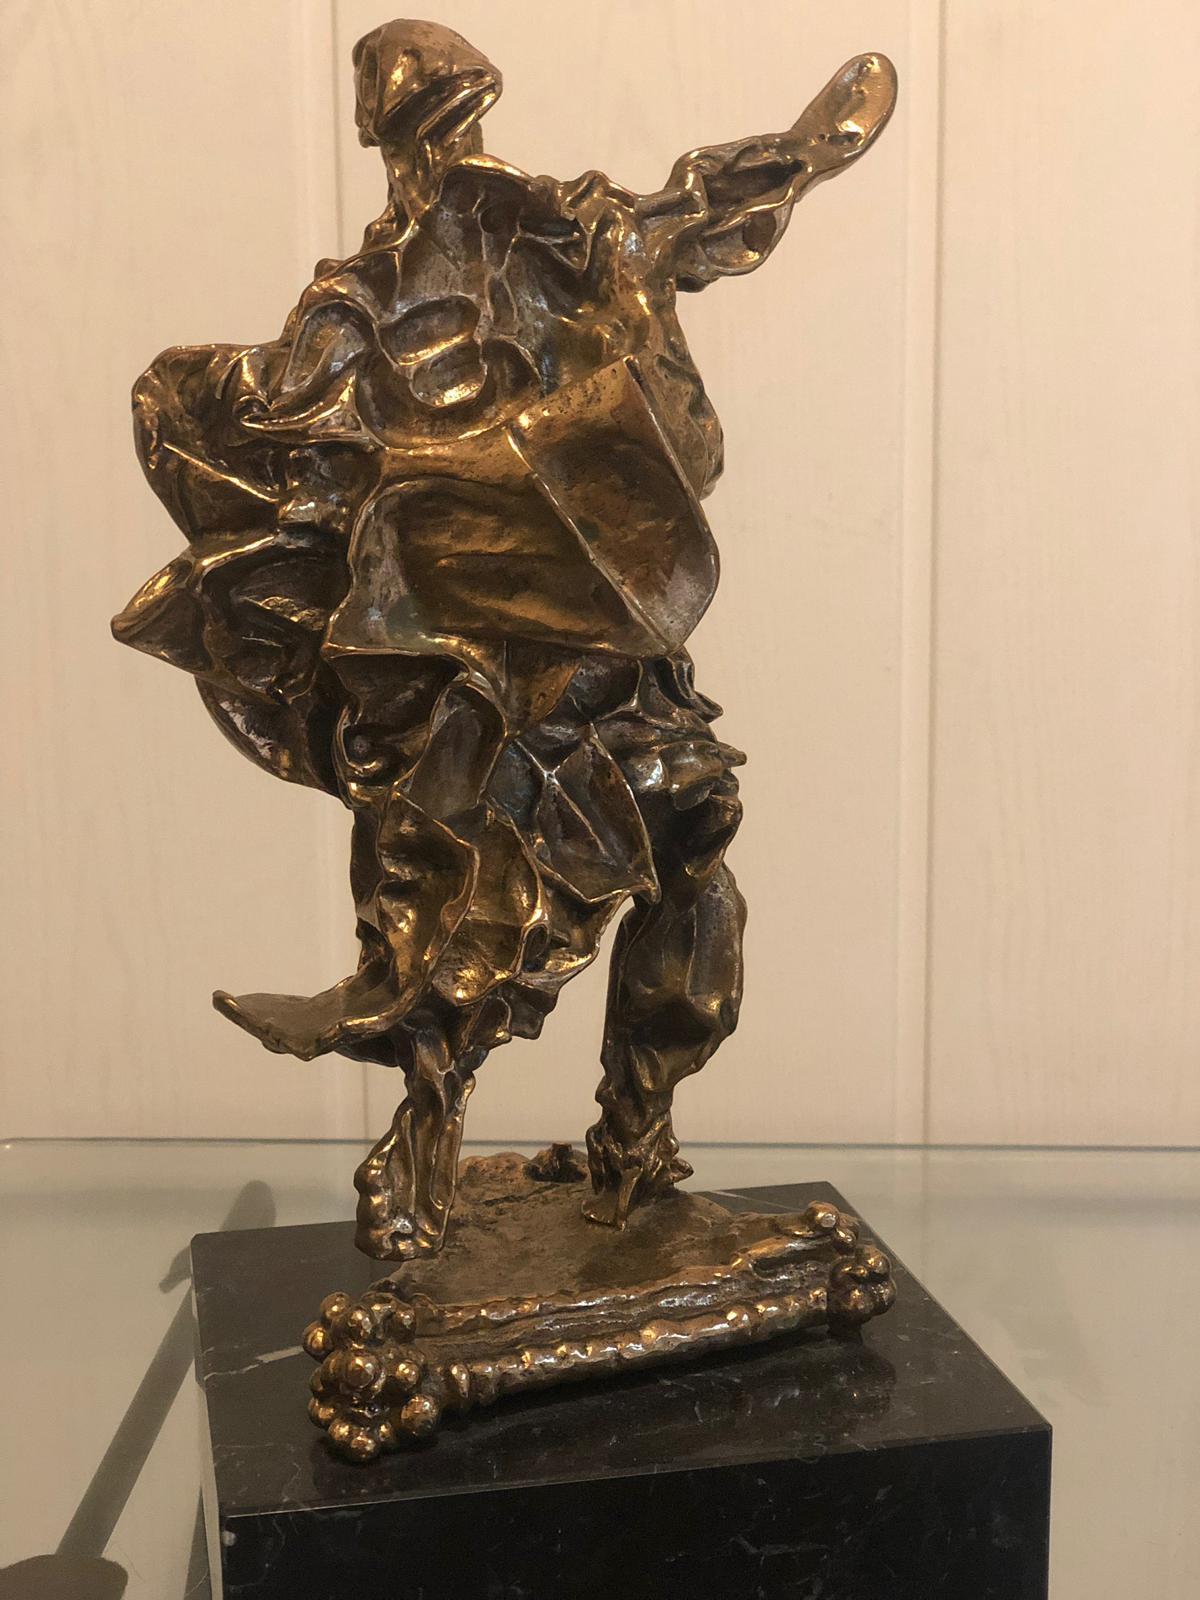 Alma de Quijote-Bronze sculpture numbered BEL 3/300
SIGNED AND NUMBERED.
IT IS THE EXAMPLAR BEL 3/300 ON A WORLD SCALE SHOT OF 300 EXEMPLARS
MEASURES WITHOUT THE PEANA: 27 CM. HEIGHT X 16 CM. WIDTH X 12 CM. BACKGROUND
MEASURES WITH THE PEANA: 33 CM.